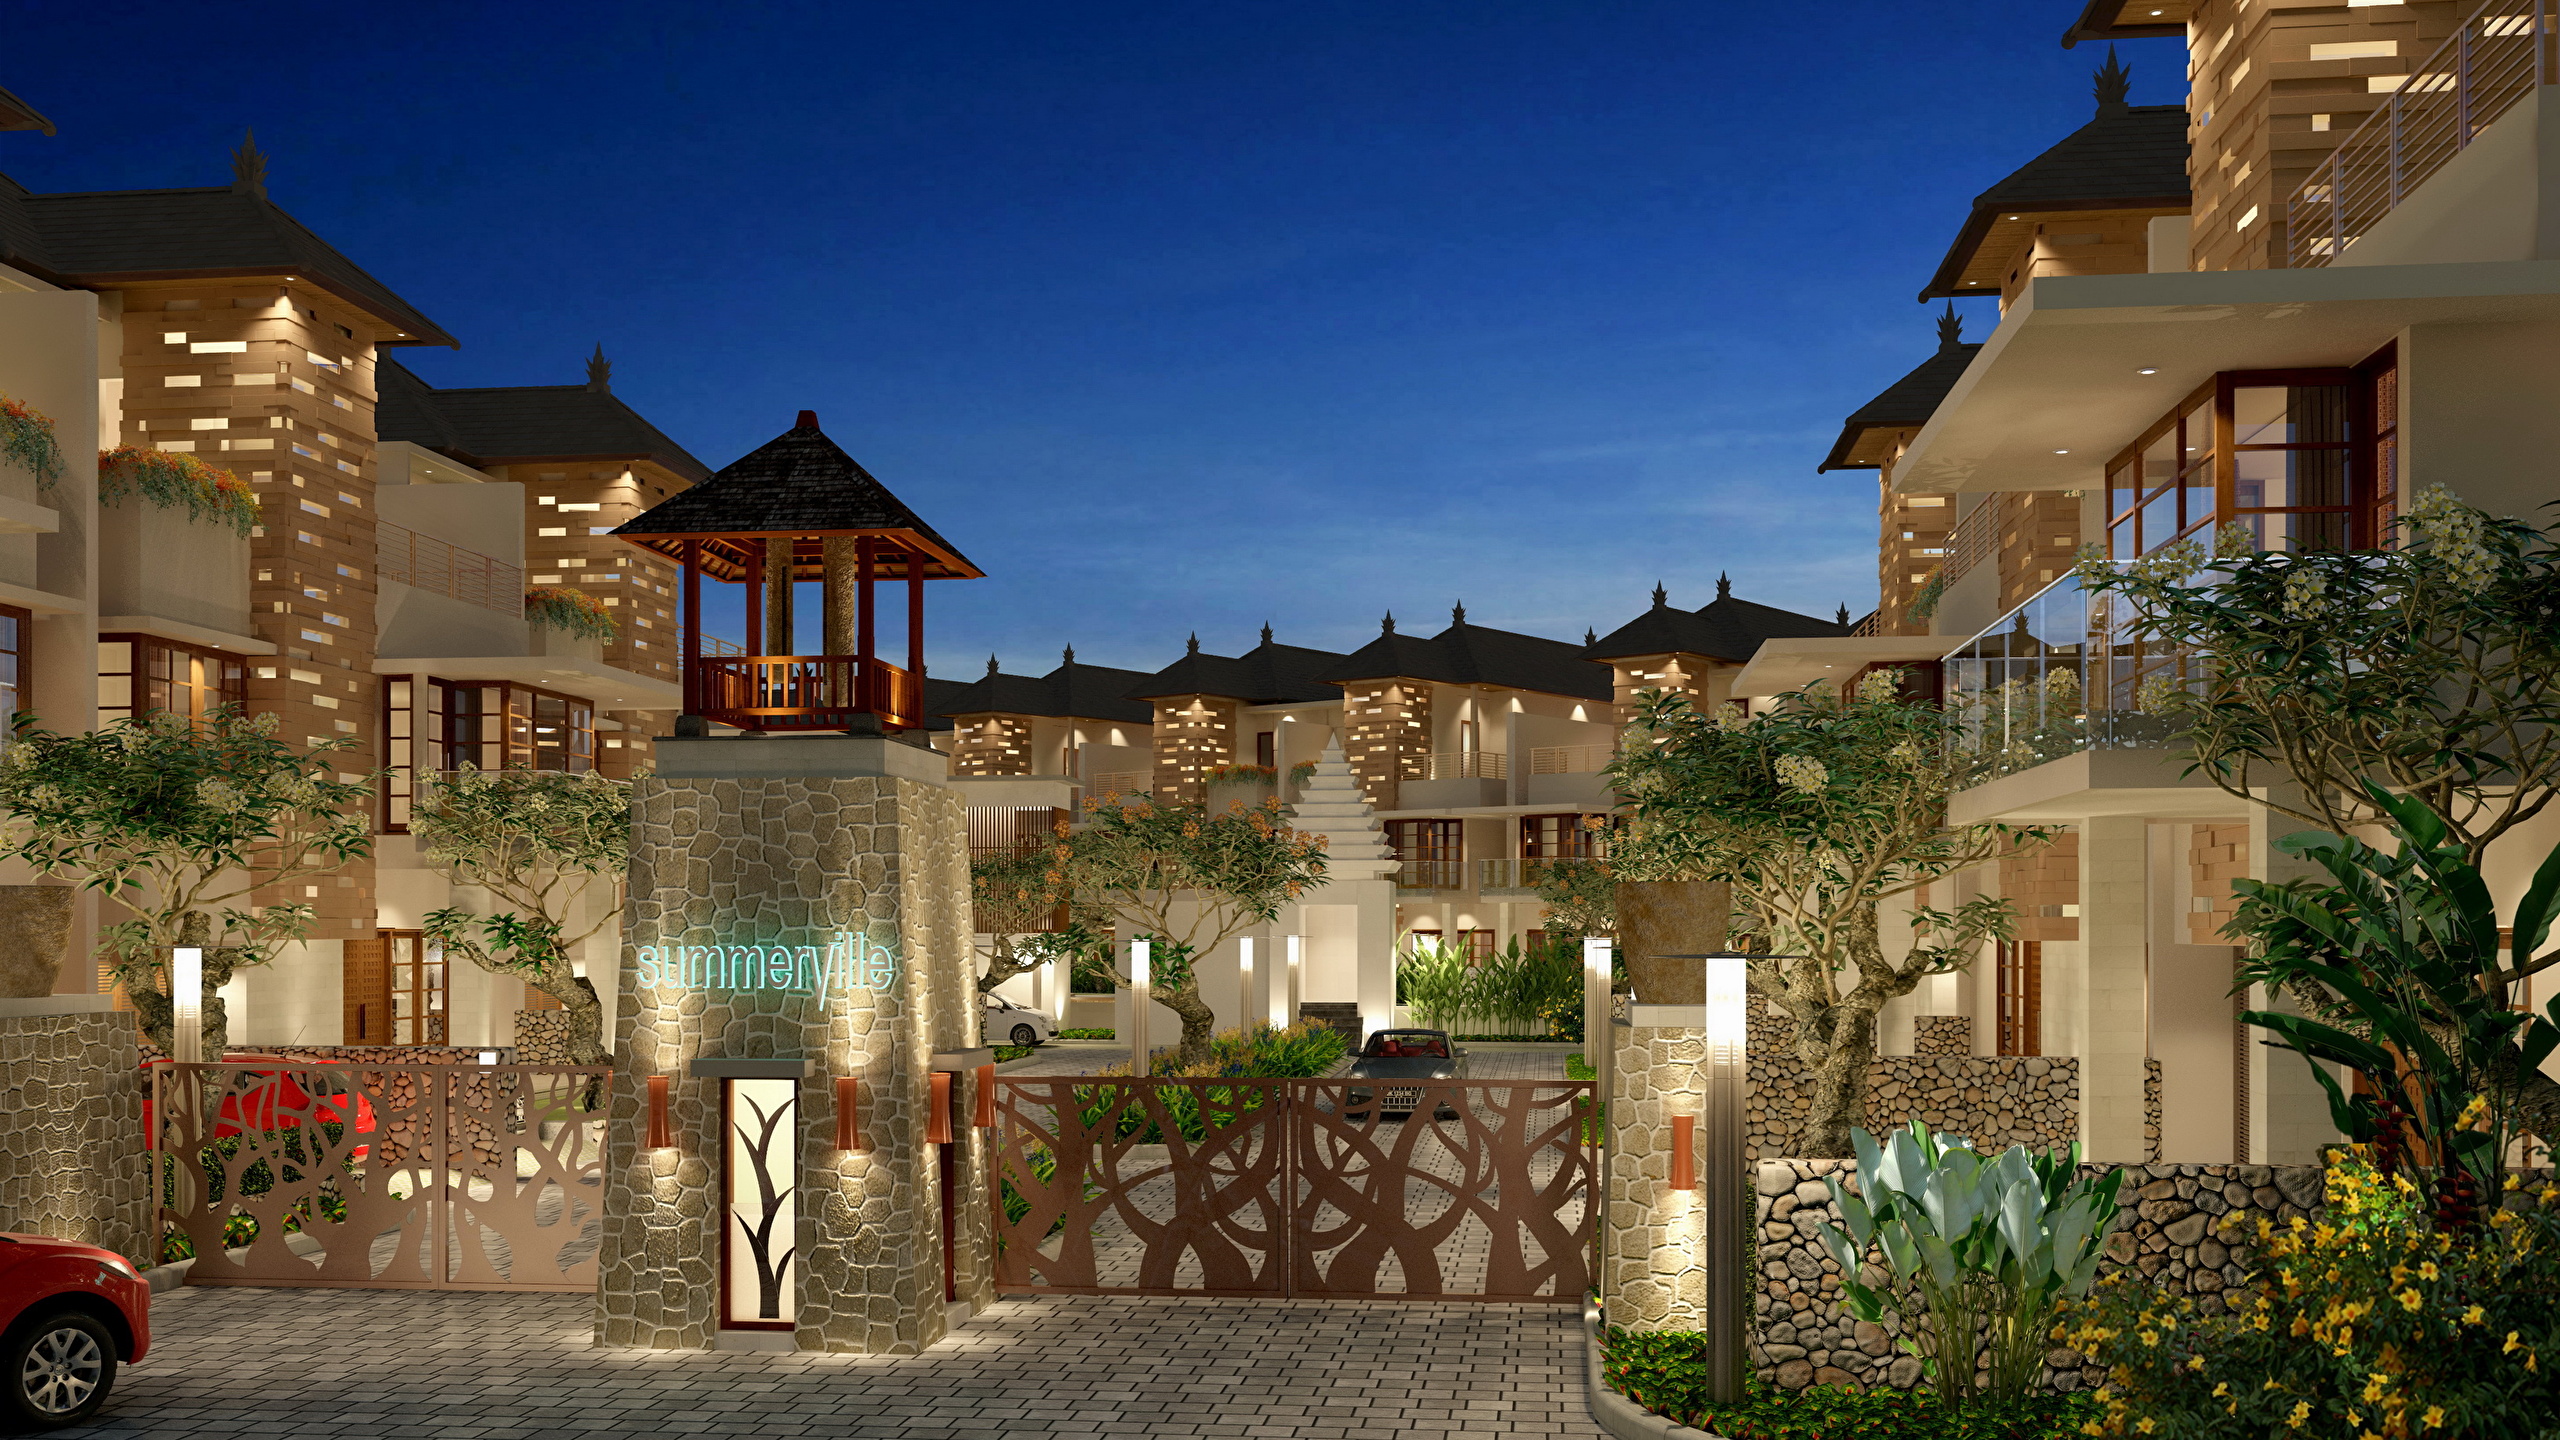 Image Indonesia Spa town Bali Hotel 3D Graphics Cities 2560x1440